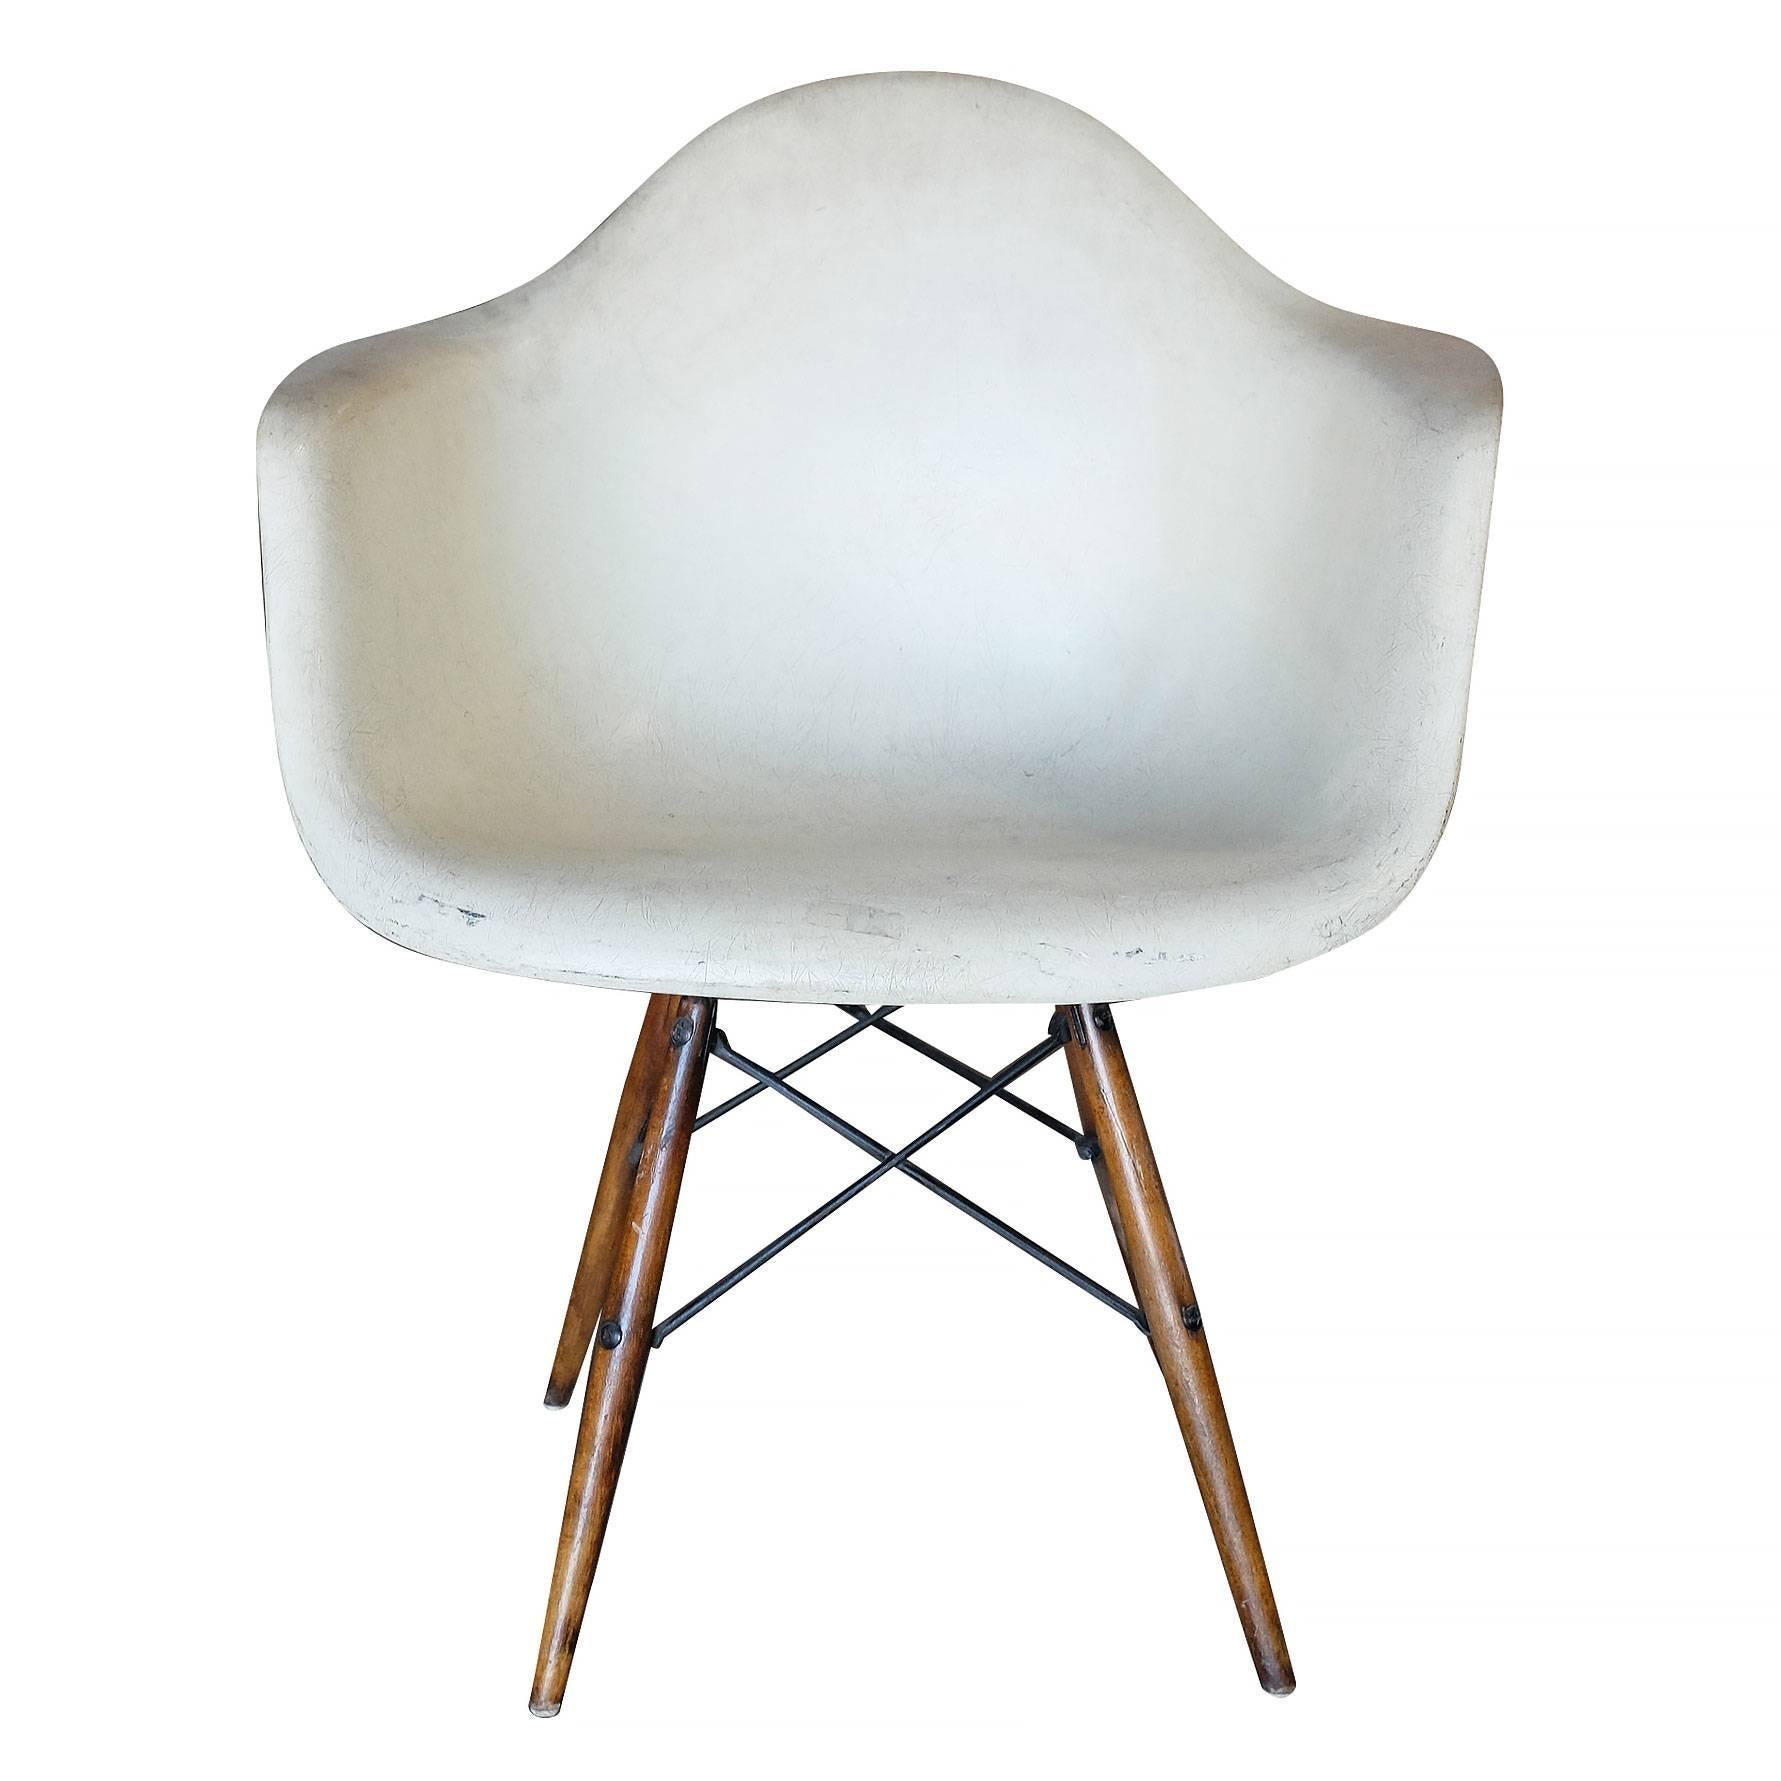 Molded fiberglass armchair with dowel base designed by Charles and Ray Eames for the Herman Miller Company. 

Signed 